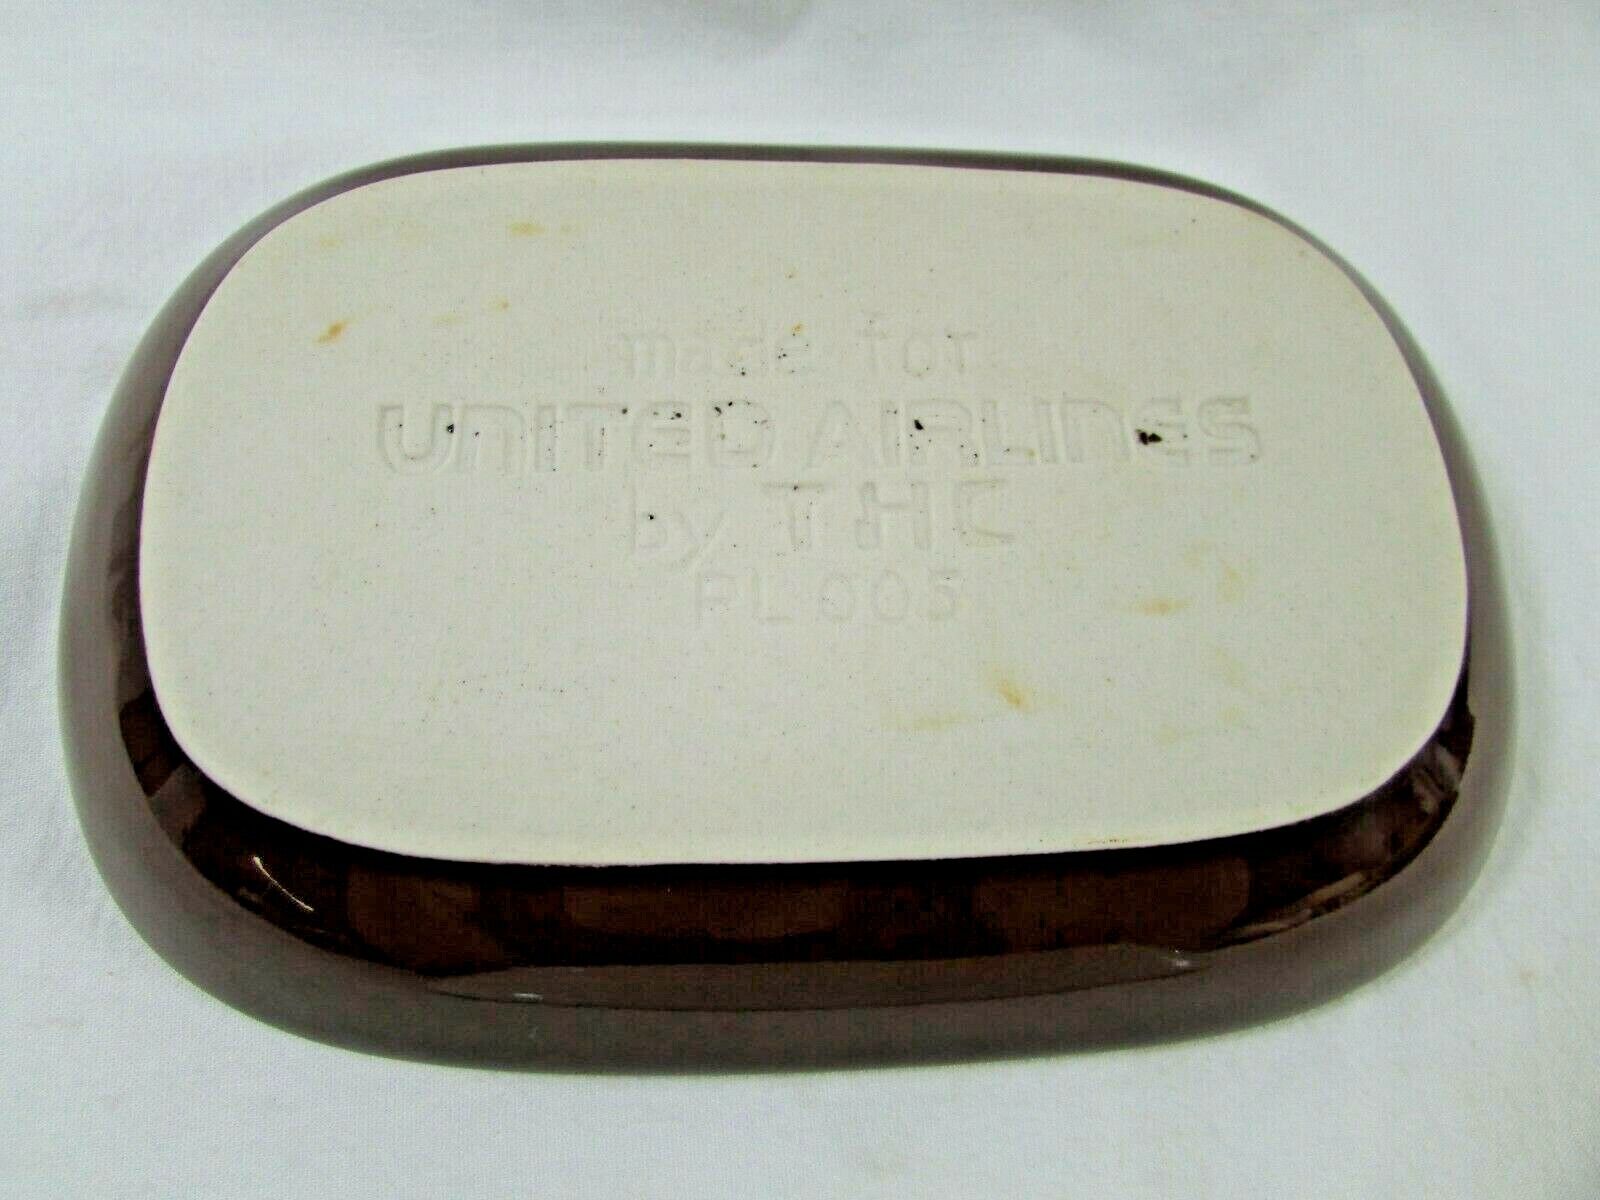 2 Dishes For UNITED AIRLINES & Eastern Airlines By THC Systems PL005 Vintage Без бренда PL 005 - фотография #6